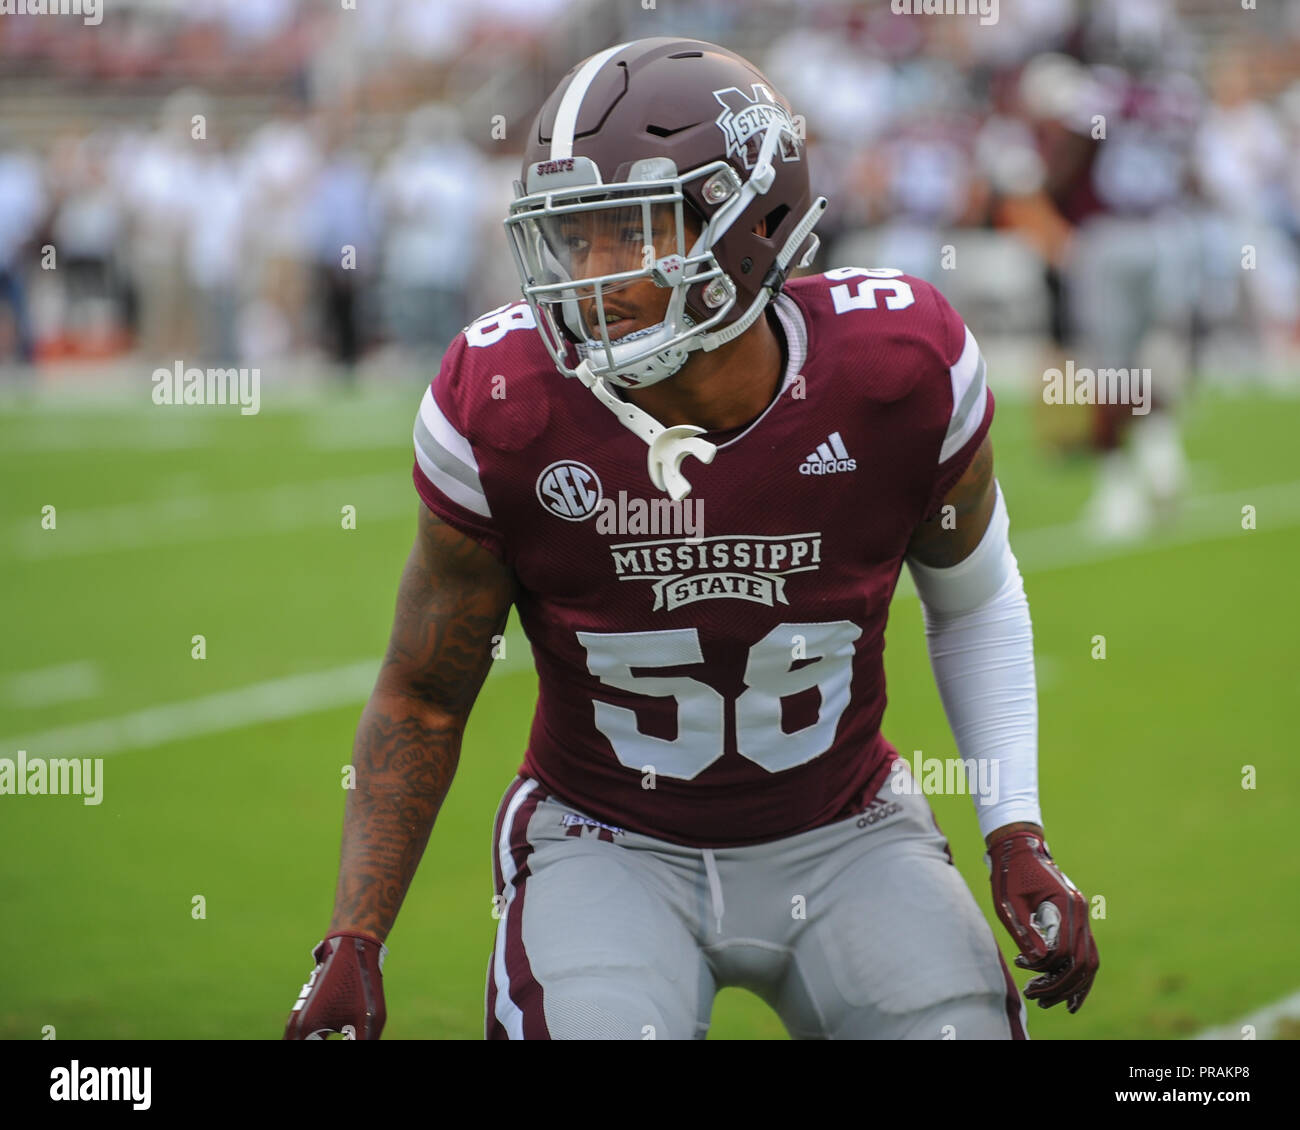 Starkville, MS, USA. 29th Sep, 2018. MSU LB, TYLER DUNNING (58), down and ready for action, during NCAA football action at Davis Wade Stadium in Starkville, MS. Florida defeated Mississippi State, 13-6. Kevin Langley/CSM/Alamy Live News Stock Photo